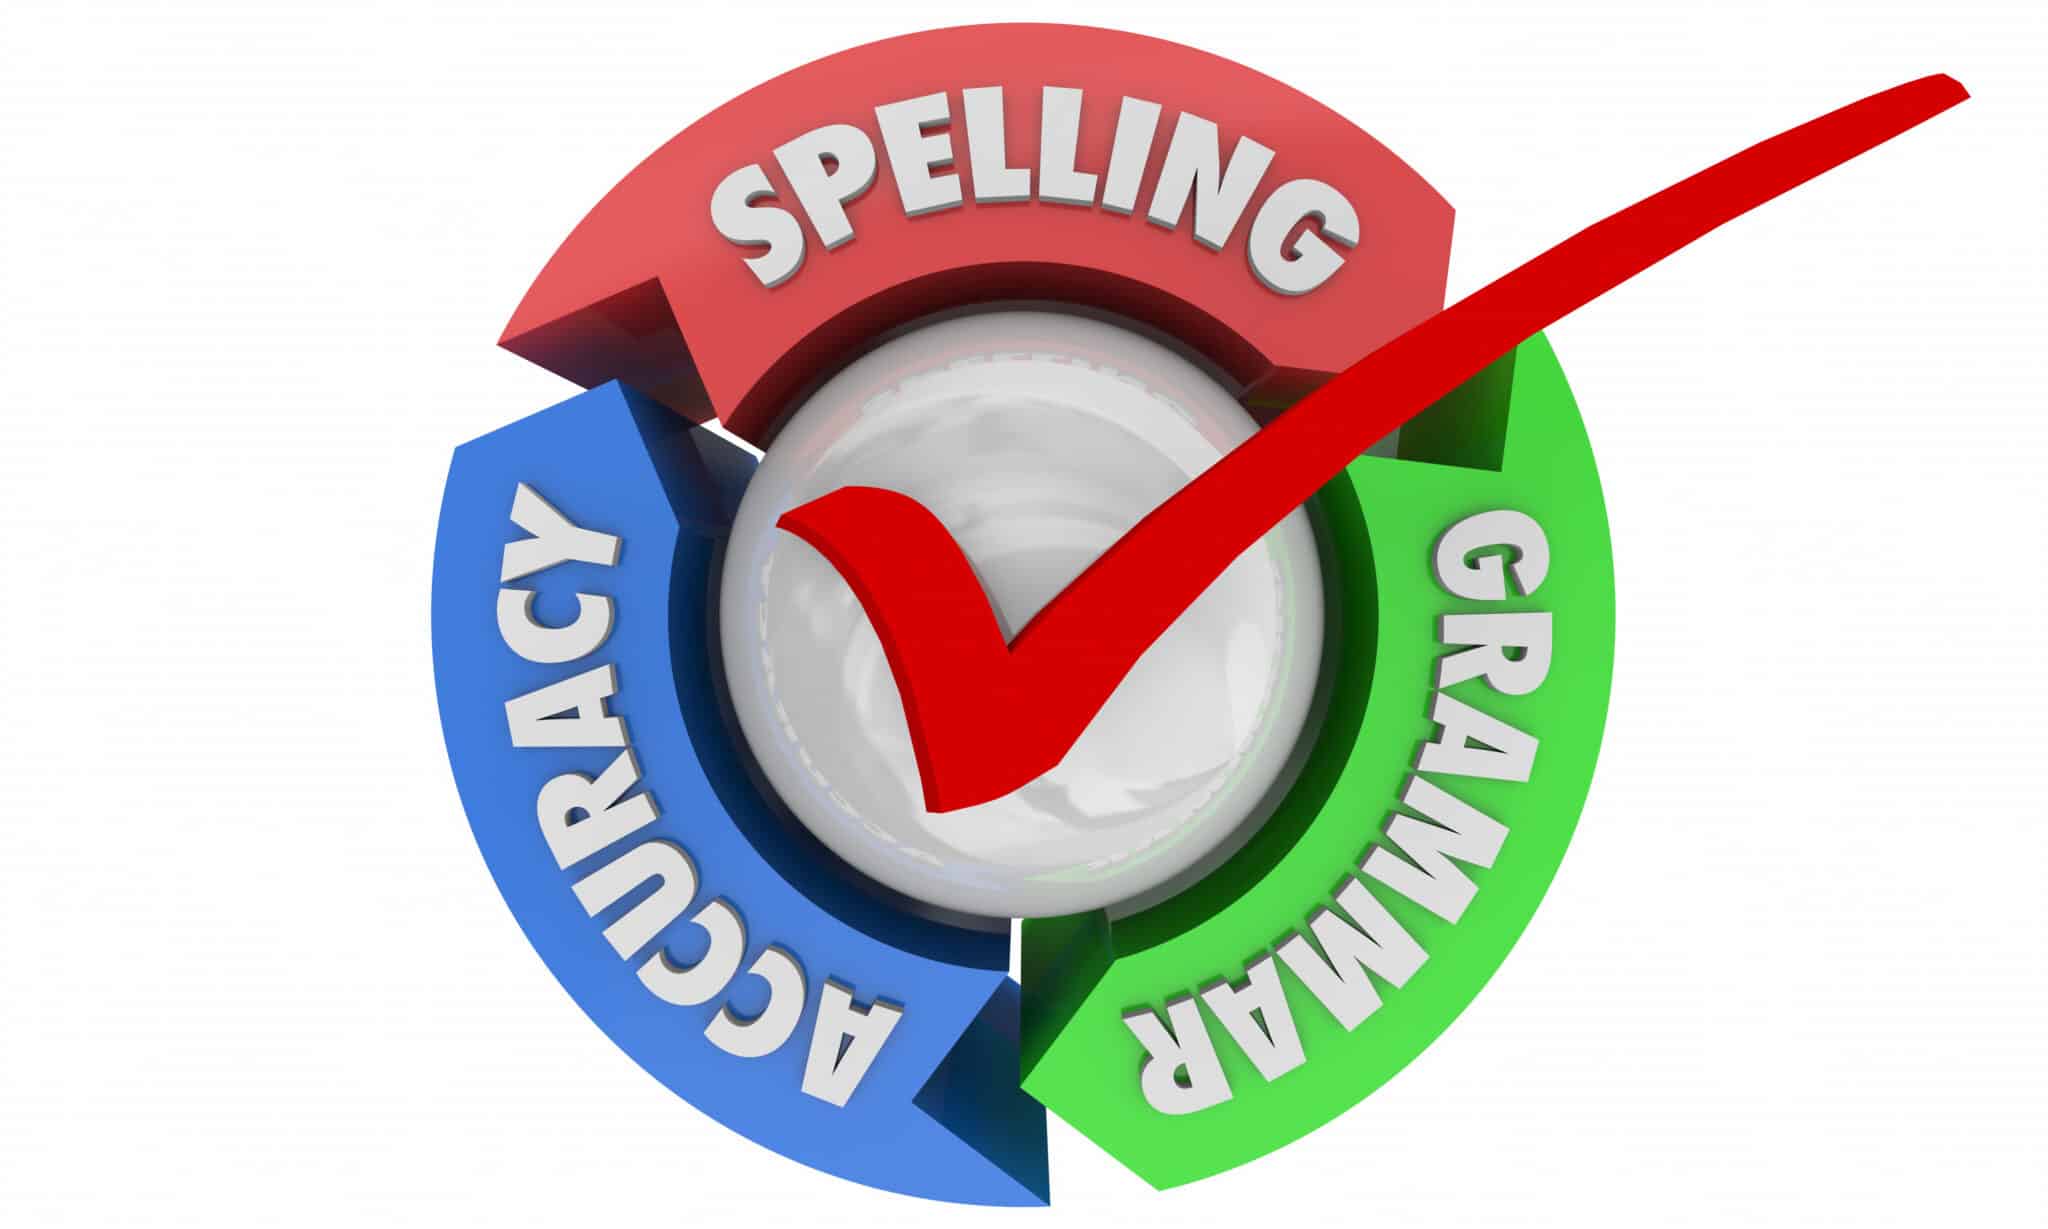 Speech-recognition editing ensures correct spelling, grammar, & accuracy in clinical documentation.